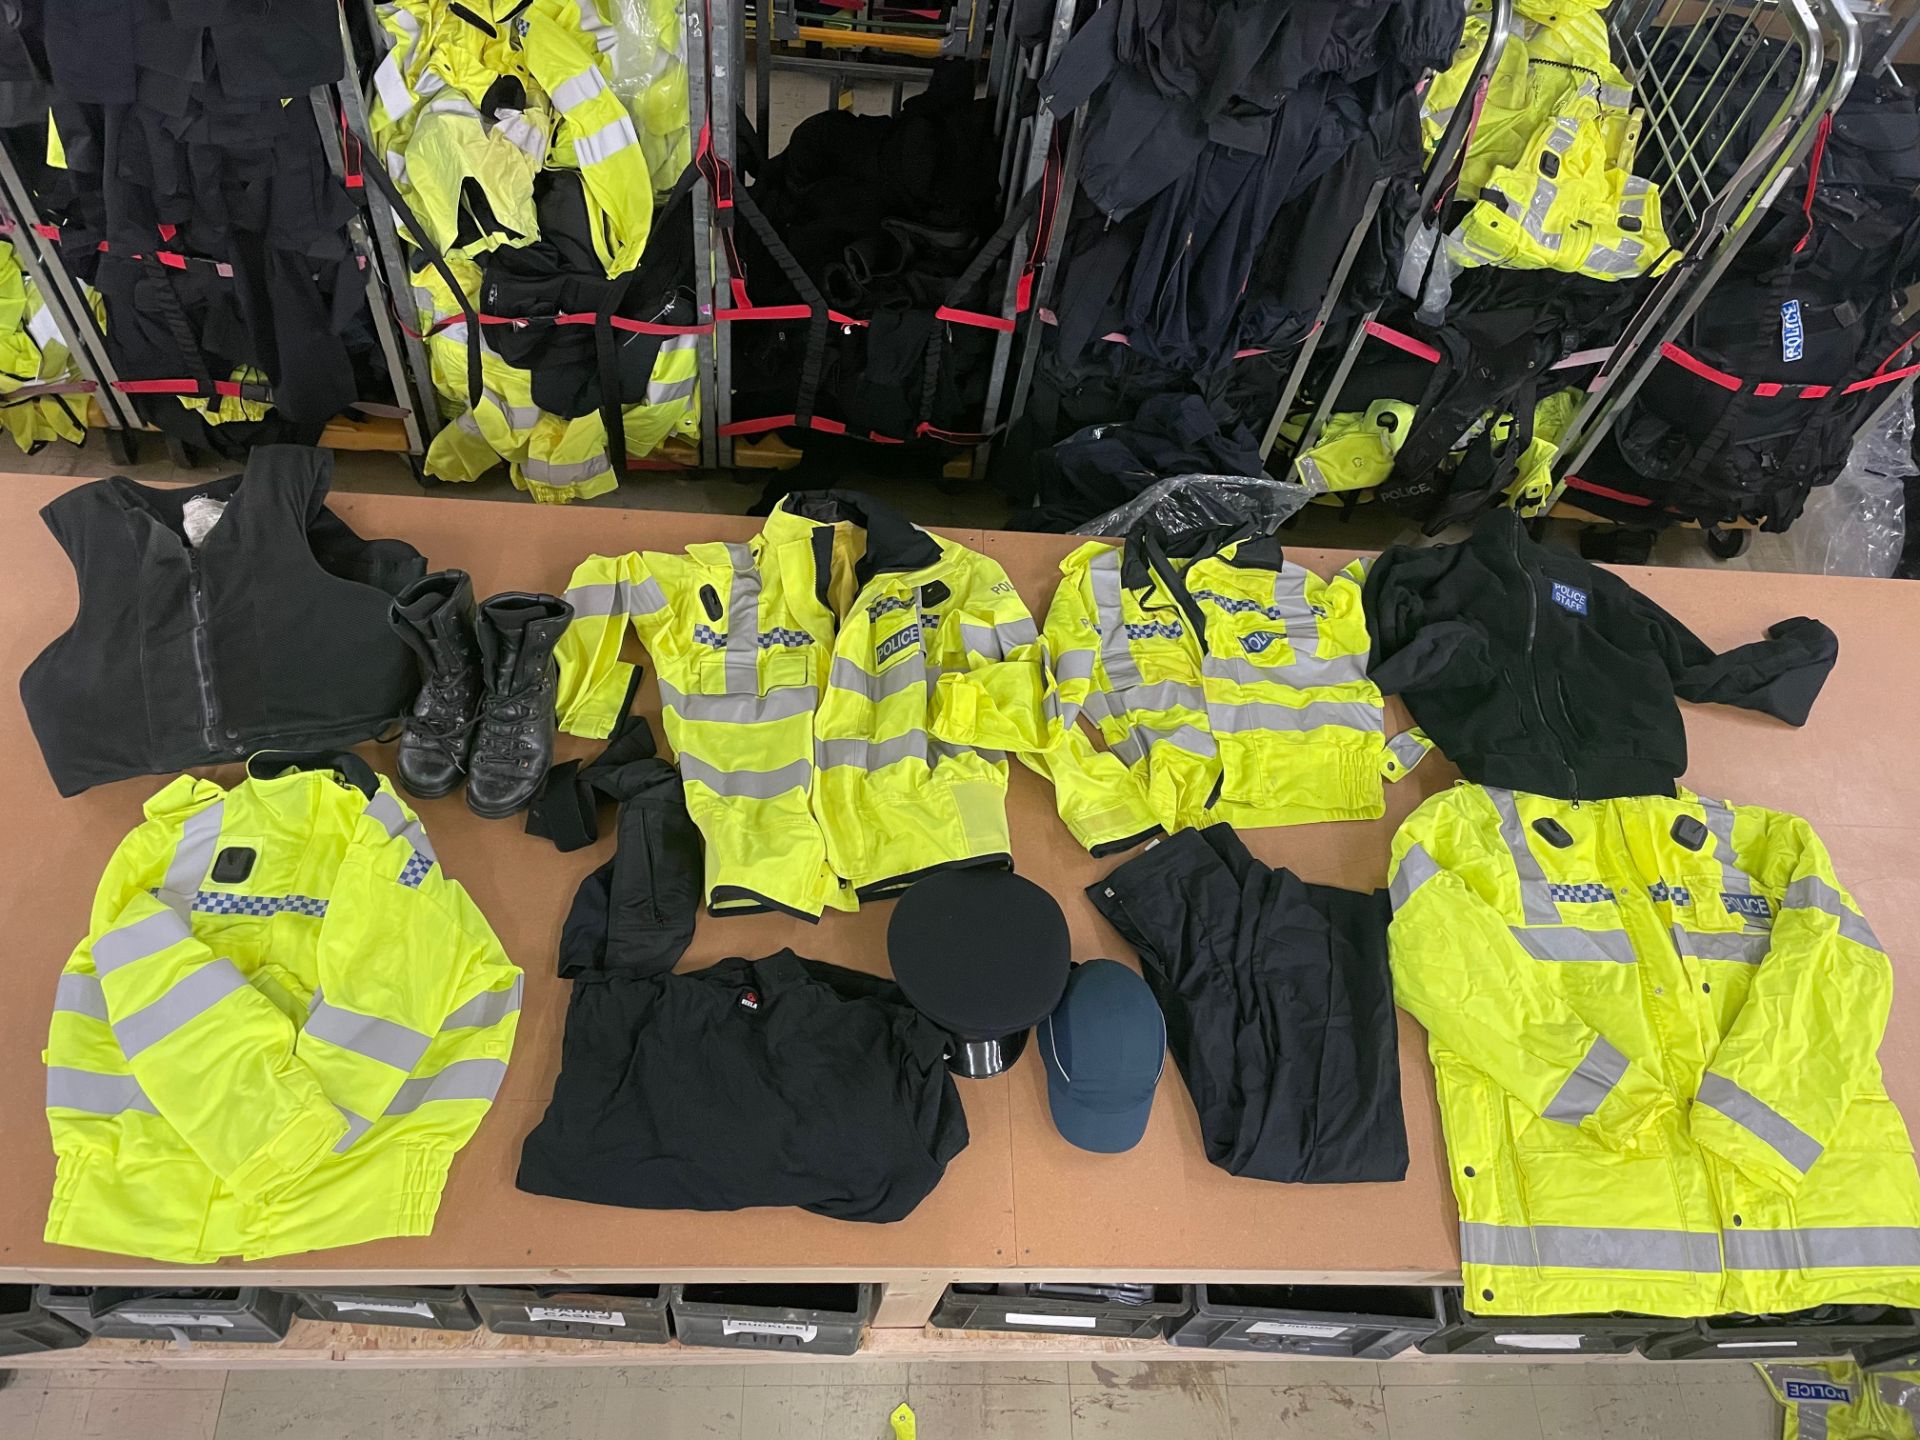 20 X BAGS EX POLICE CLOTHING & ACCESSORIES - RRP £5500.00 - Image 7 of 12